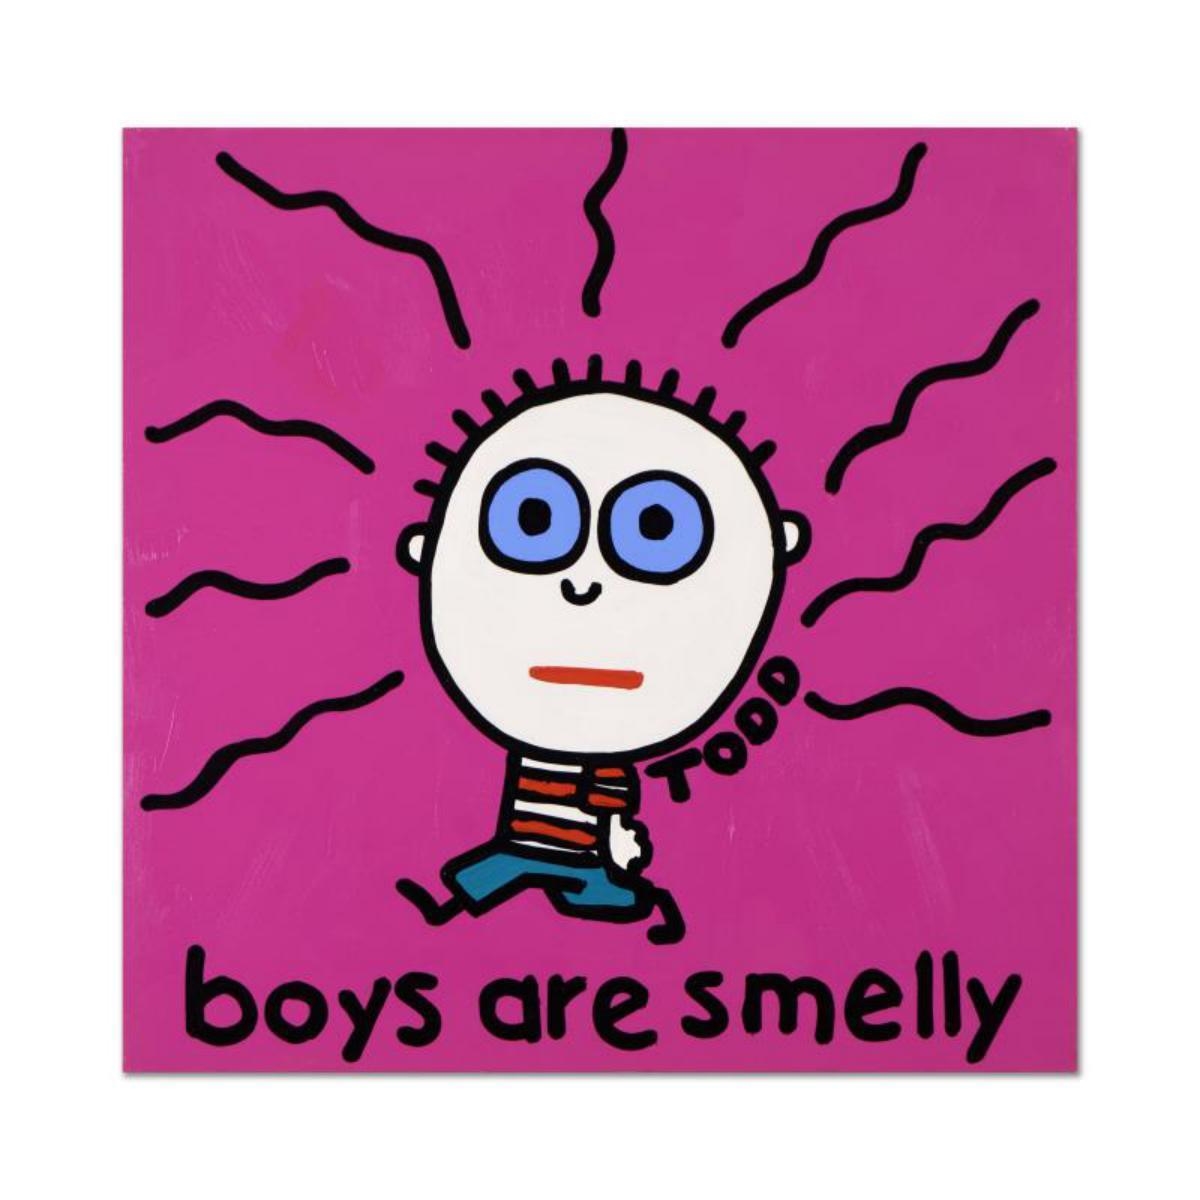 Boys Are Smelly by Todd Goldman